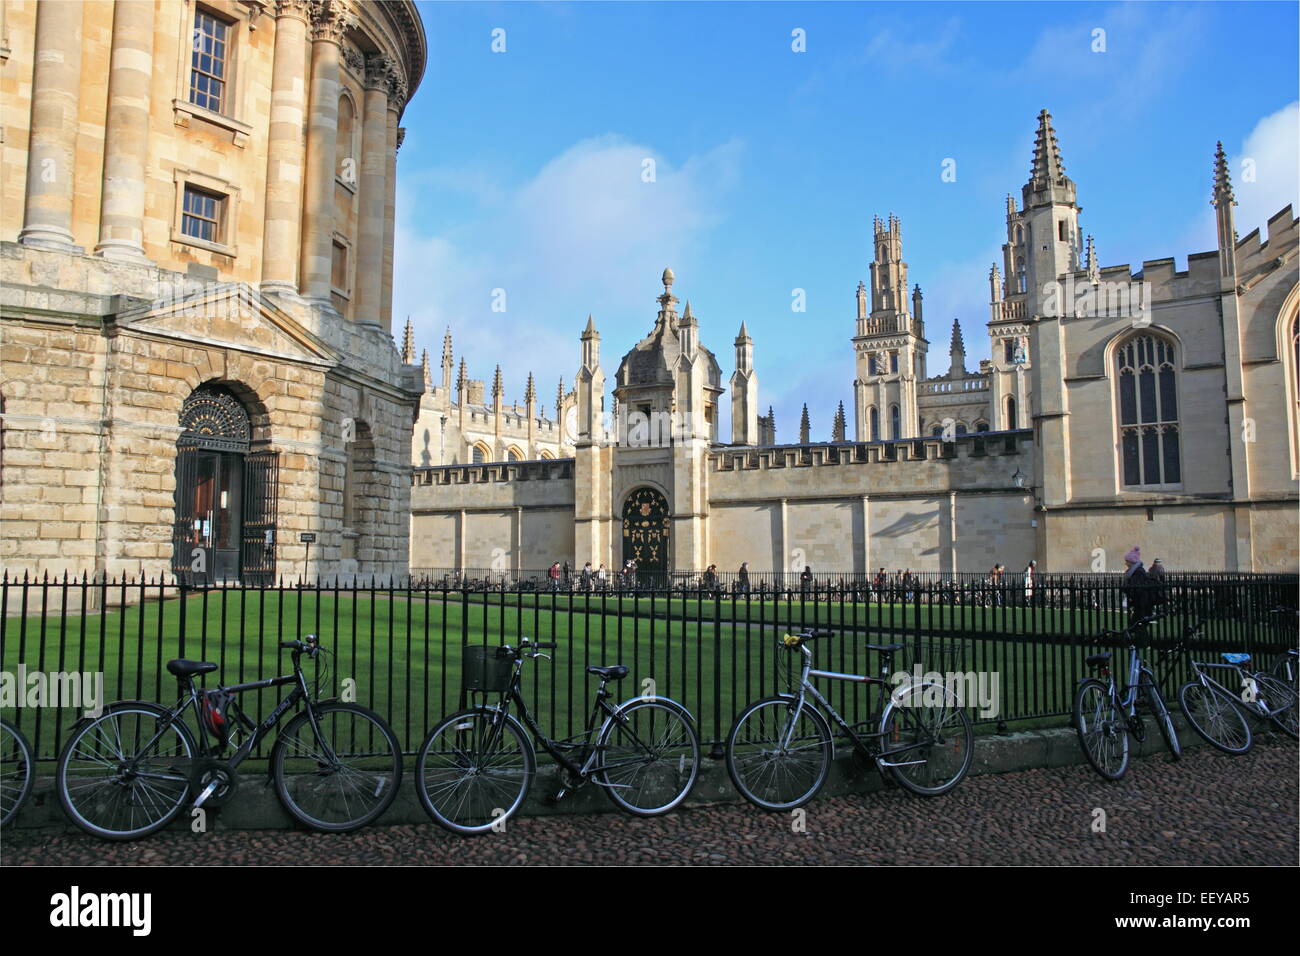 Radcliffe Camera and All Souls College, Radcliffe Square, Oxford, Oxfordshire, England, Great Britain, United Kingdom UK, Europe Stock Photo